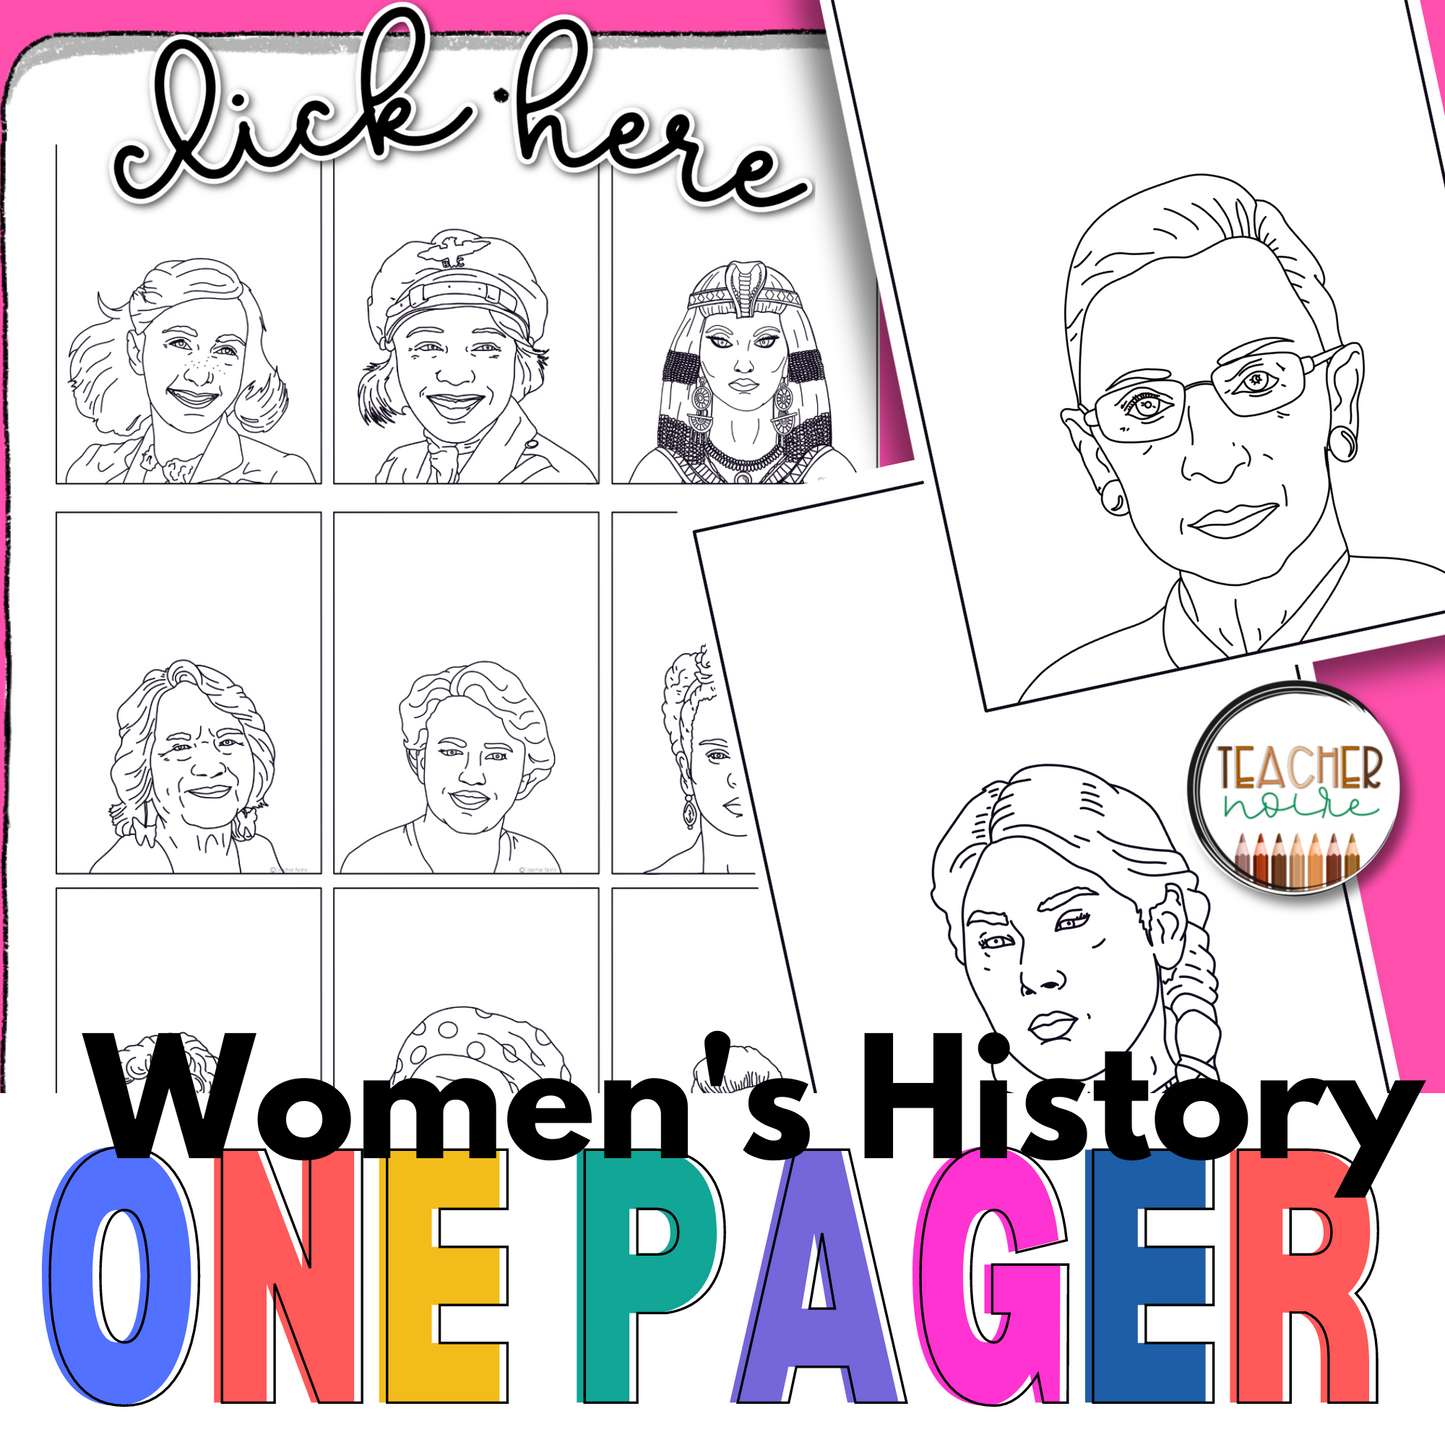 Women's History One Pager Project